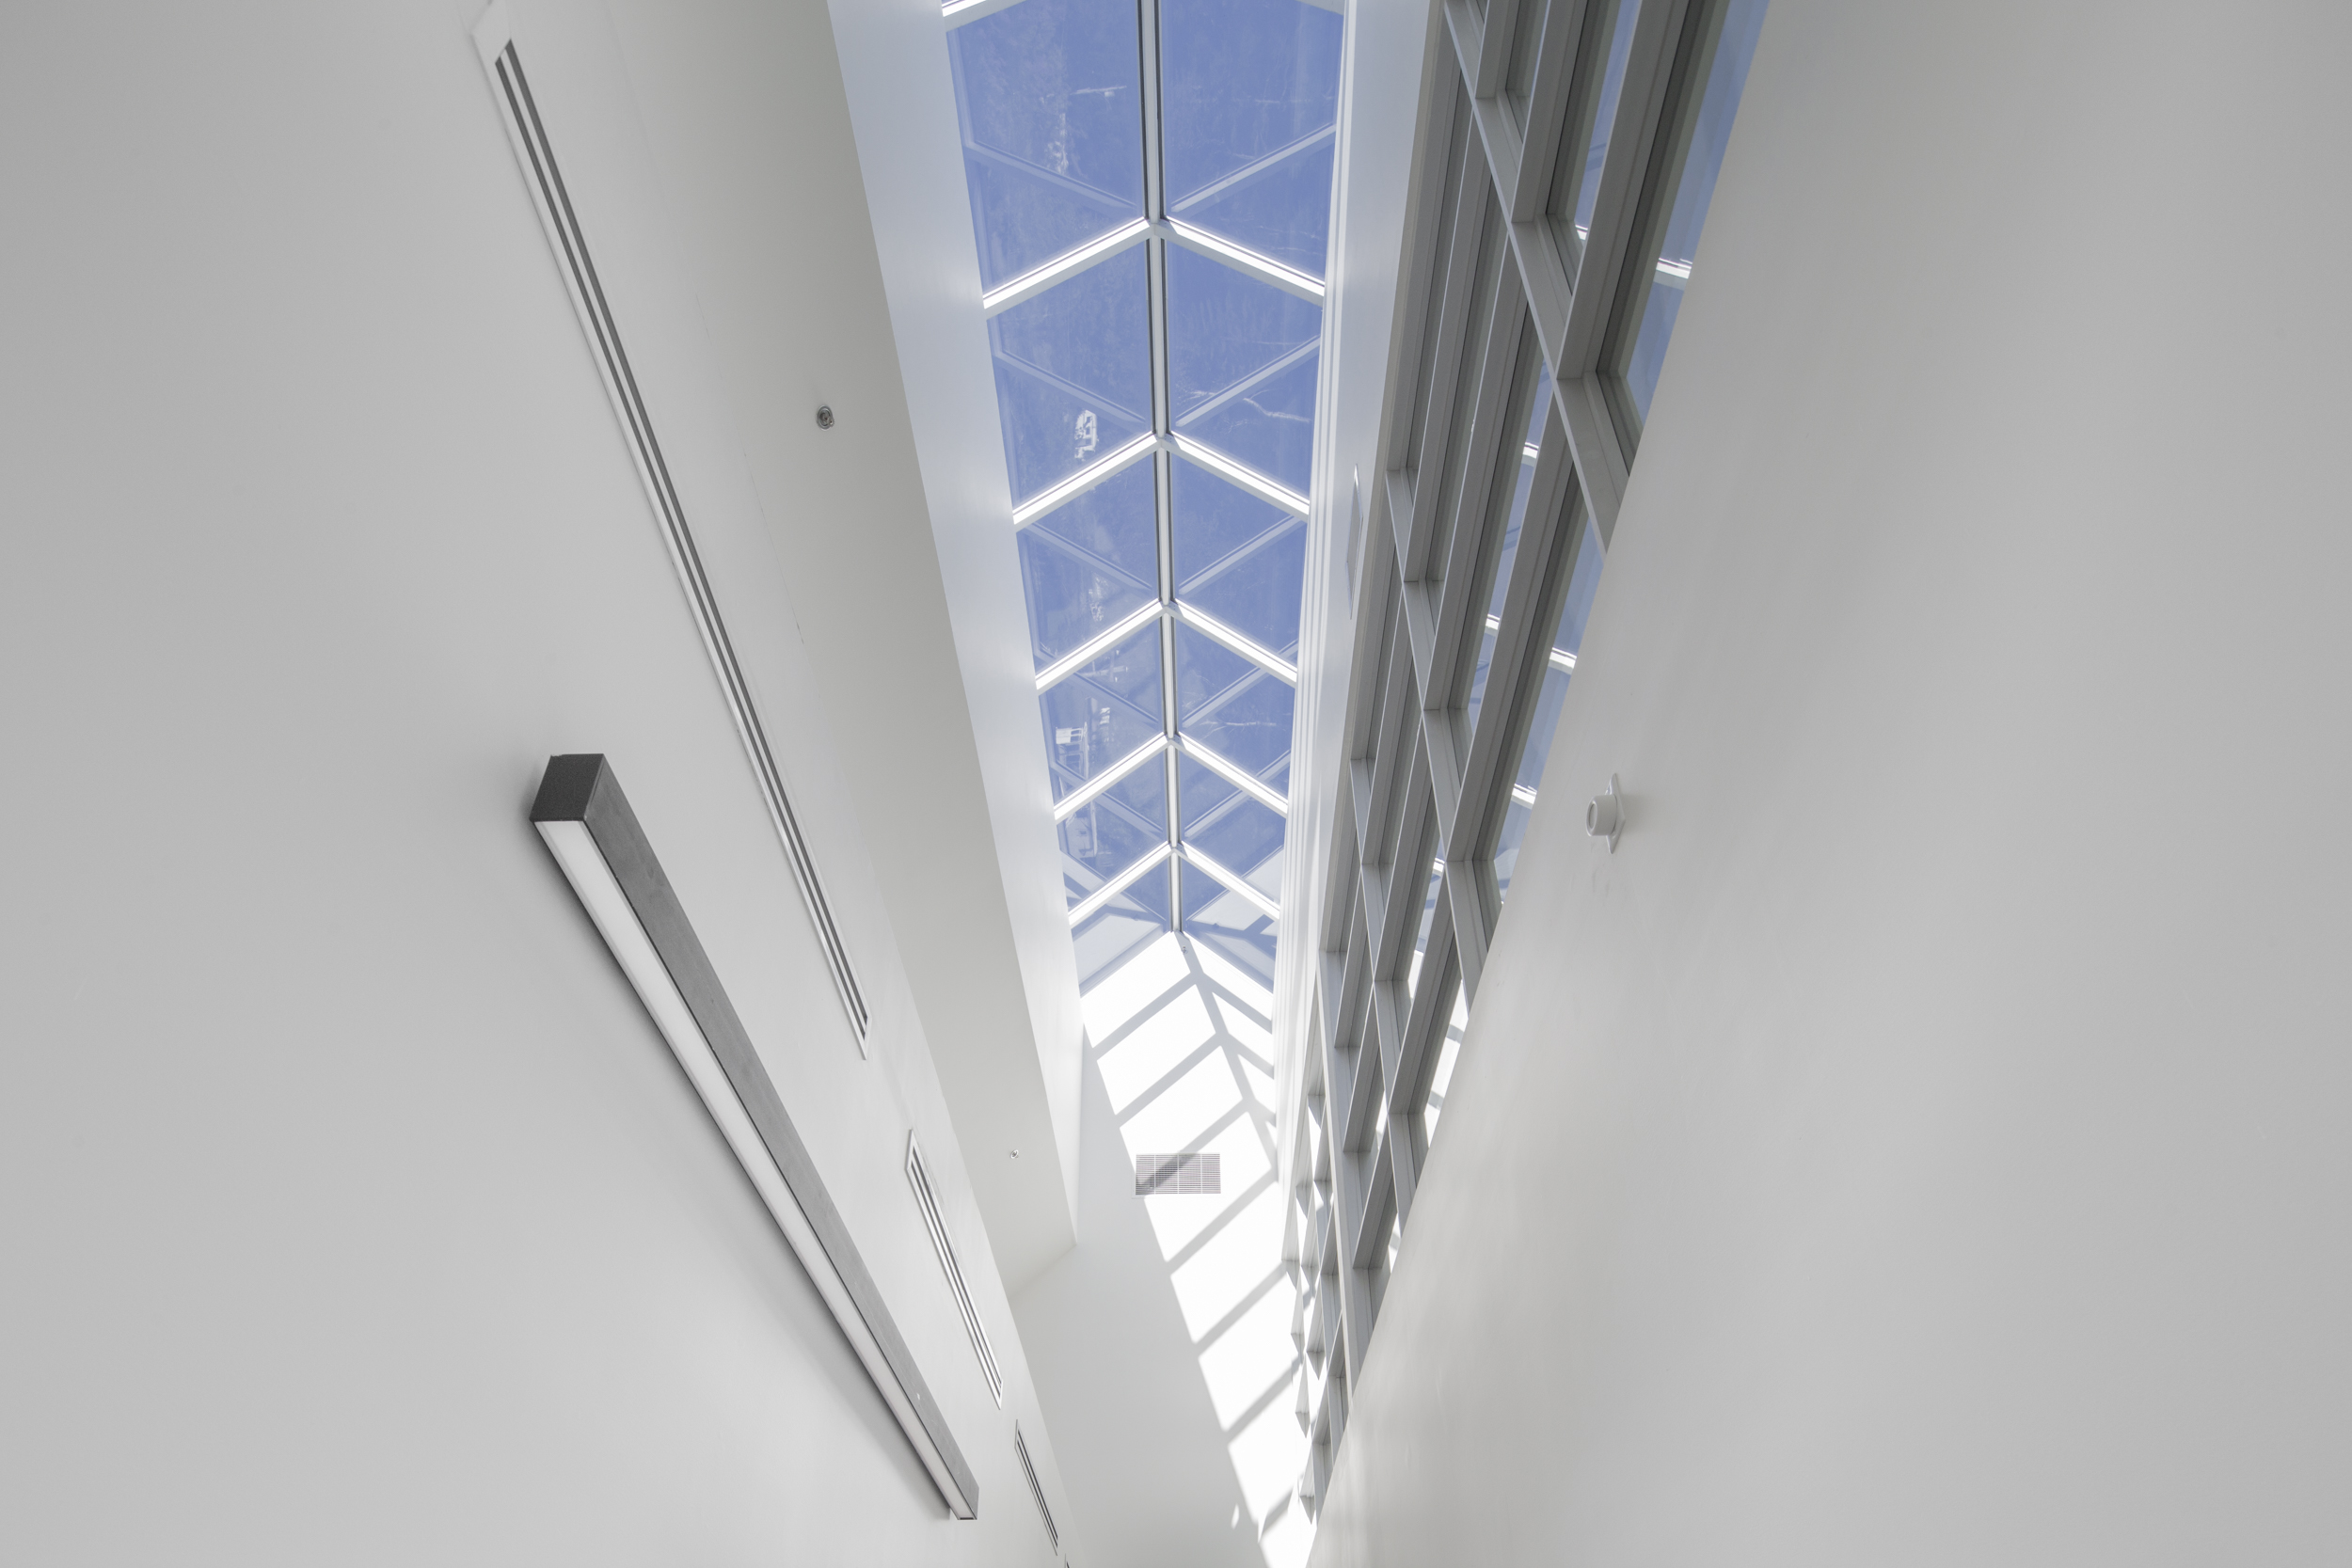 A skylight along the top edge of the gable roof illuminates the reception area and administrative functions of the building.